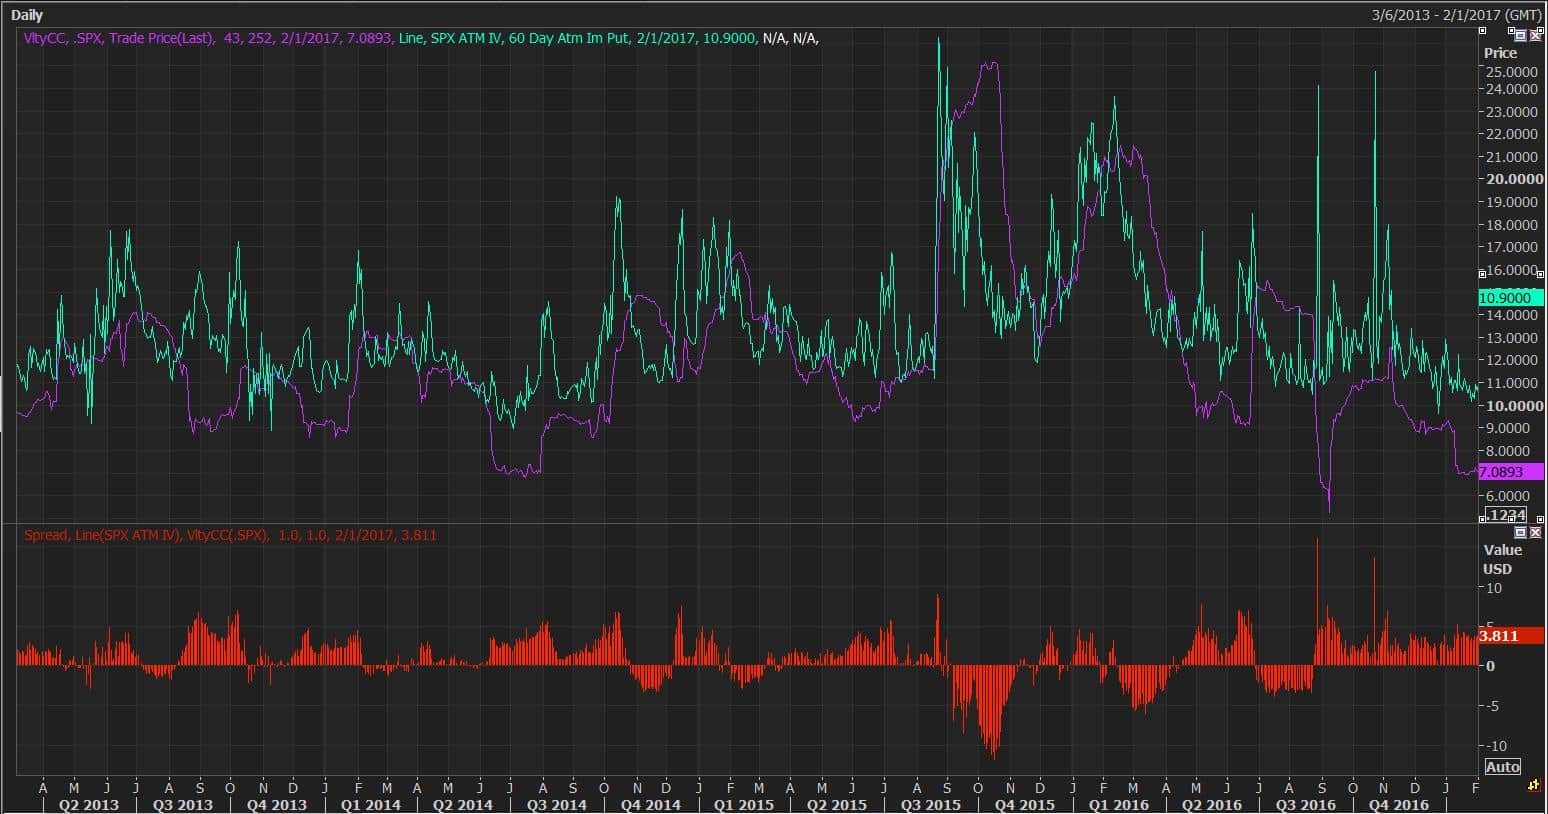 60 Day ATM Implied Vol